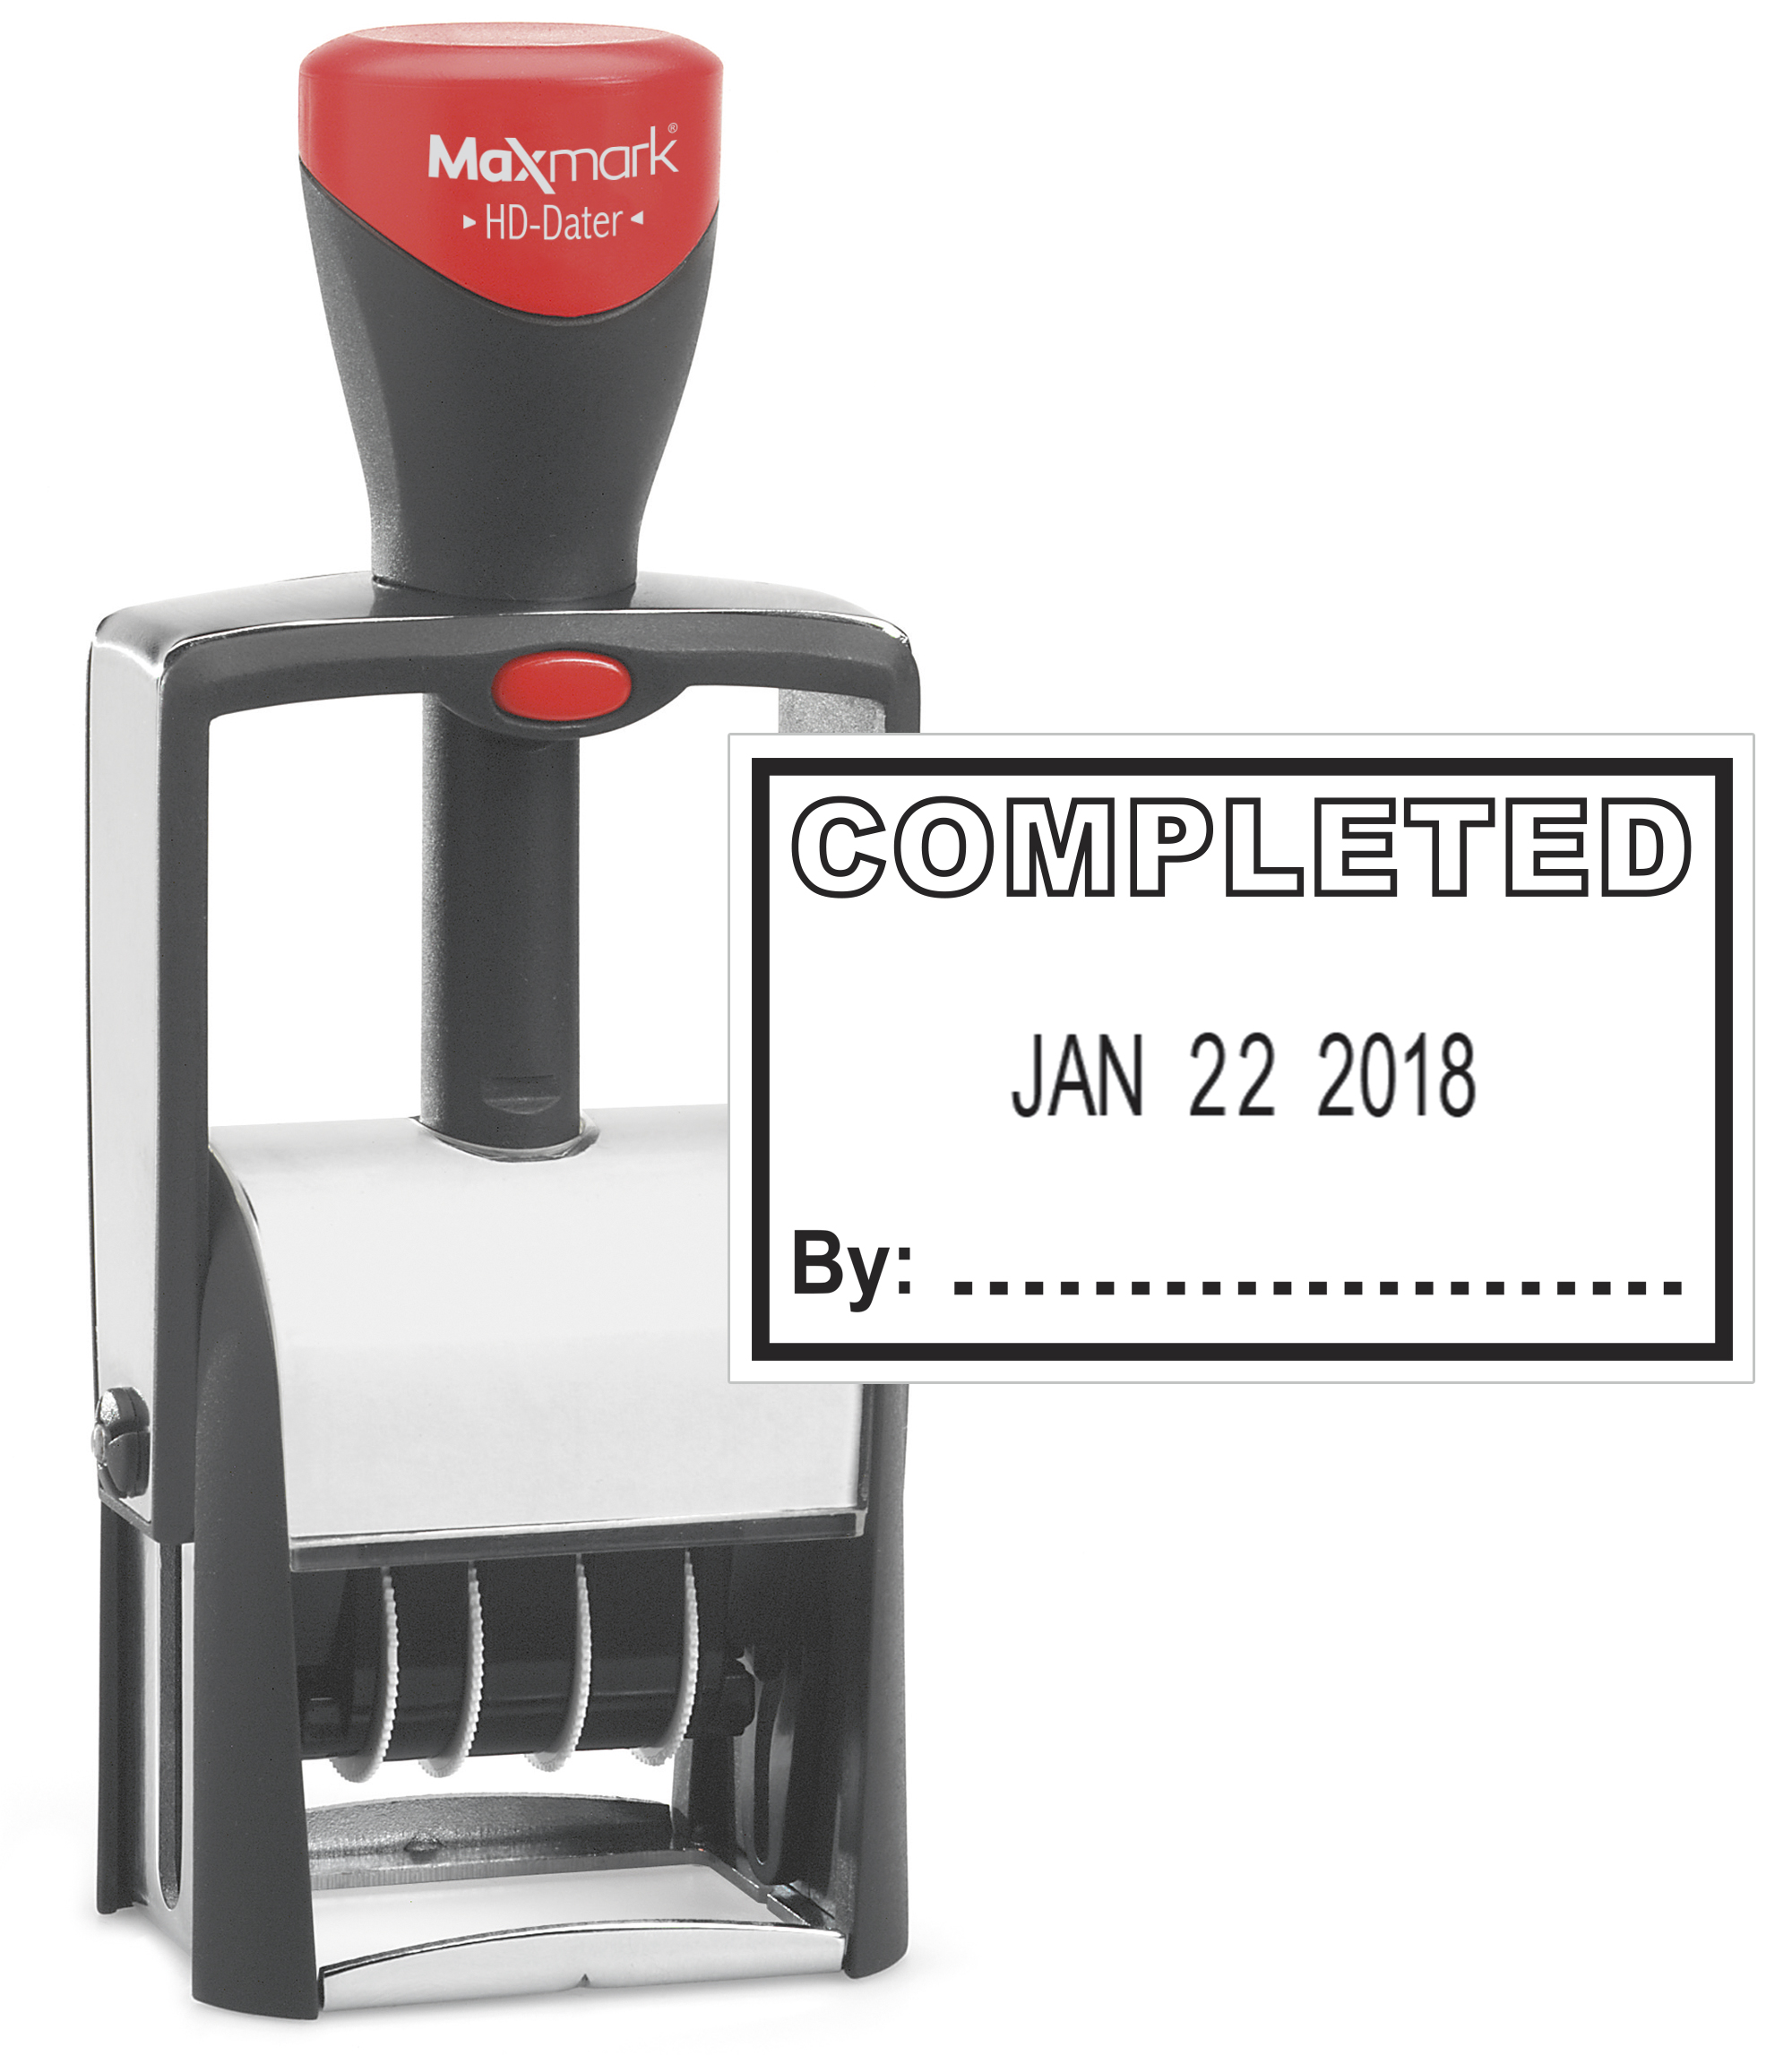 Heavy Duty Date Stamp with "COMPLETED" Self Inking Stamp - BLACK Ink